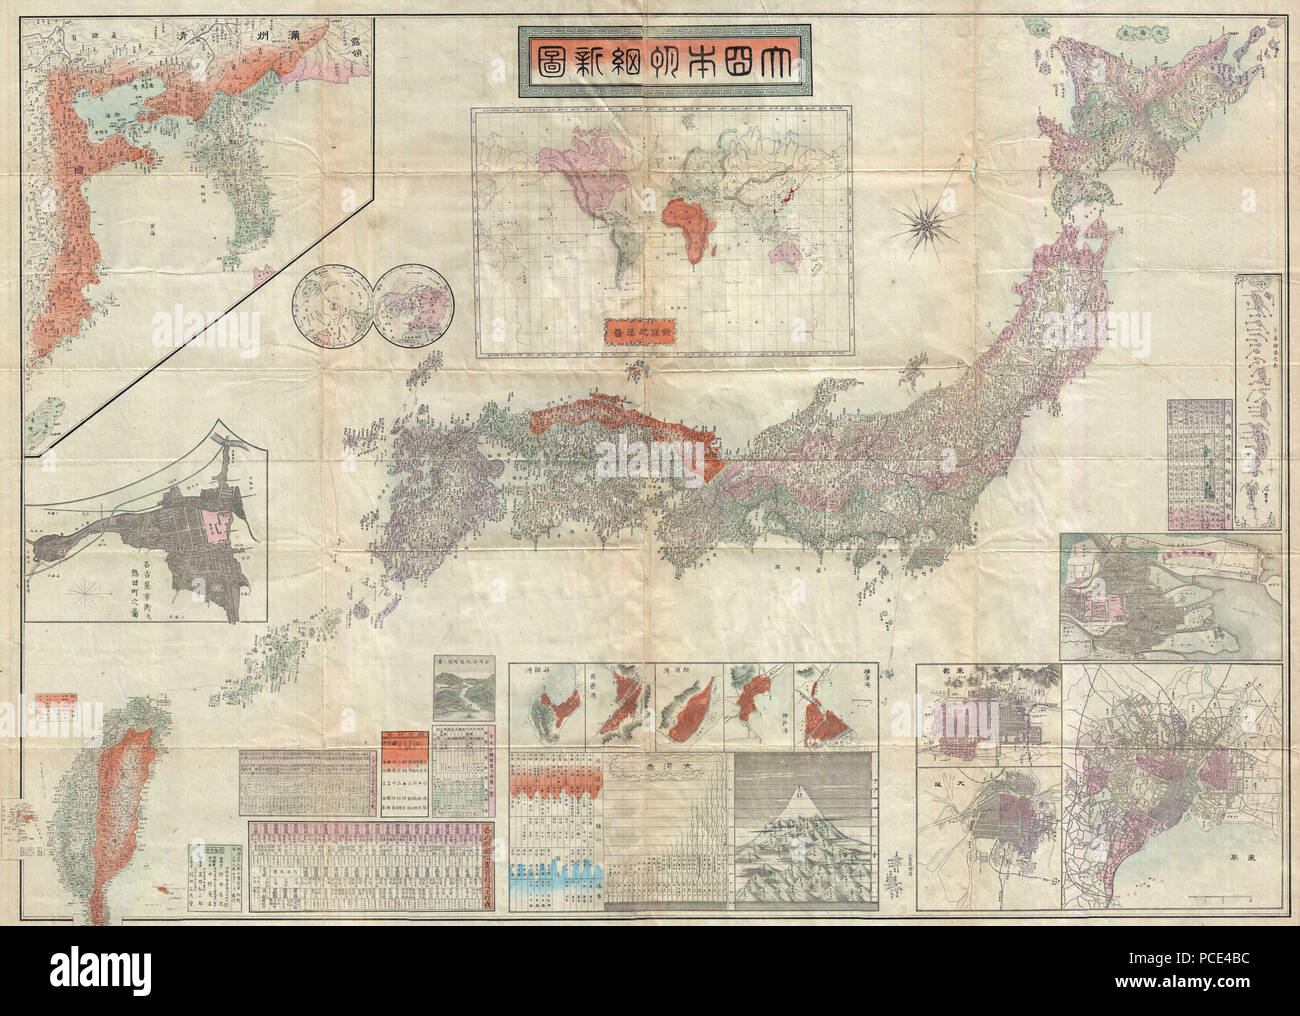 11 1895 Meiji 28 Japanese Map of Imperial Japan with Taiwan - Geographicus - ImperialJapan-meiji28-1895 Stock Photo